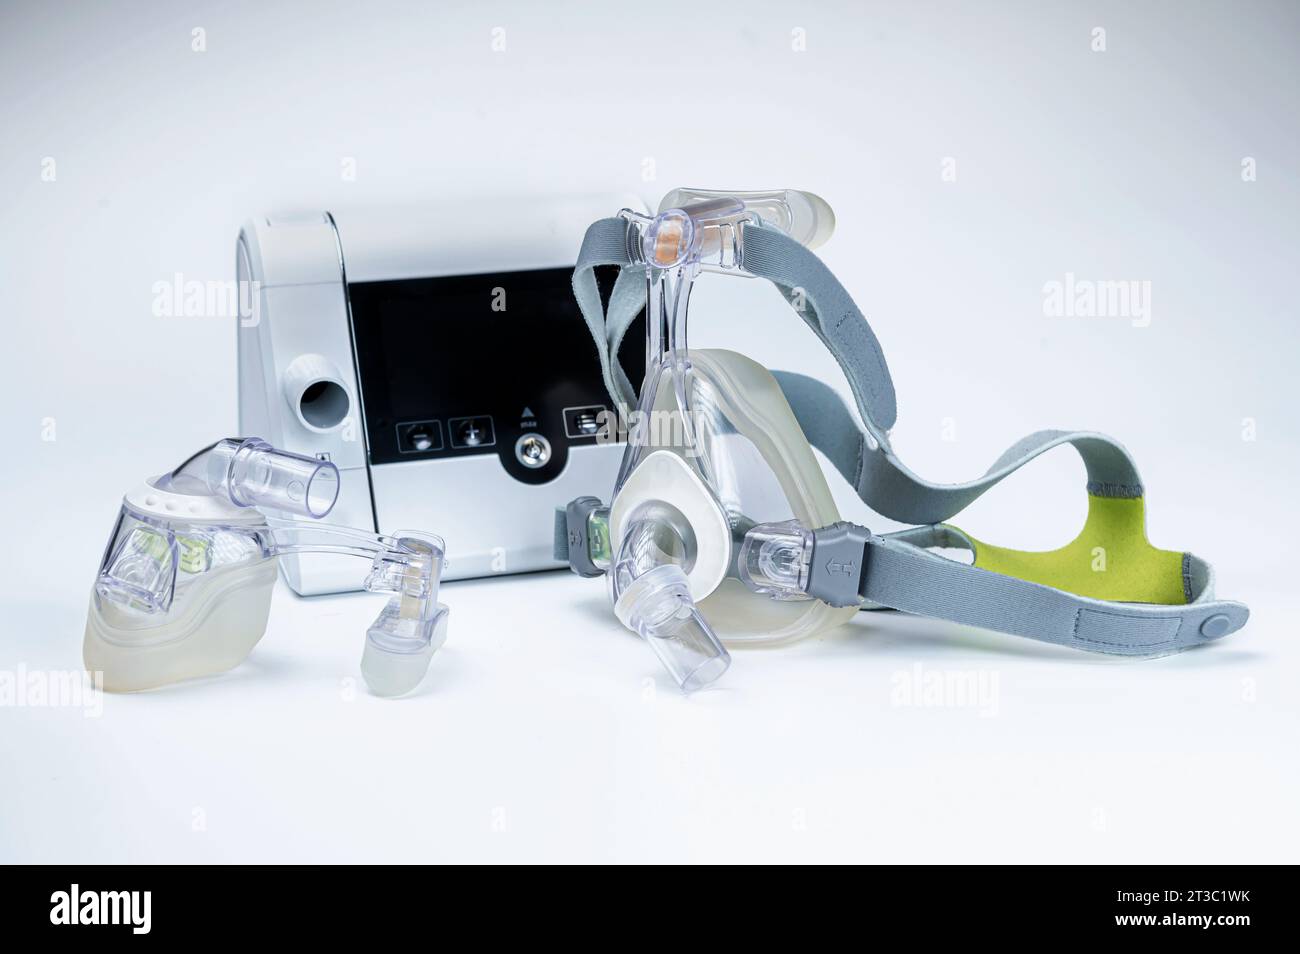 CPAP machine with mask and hose, for people with sleep apnea, respiratory, or breathing disorder Stock Photo